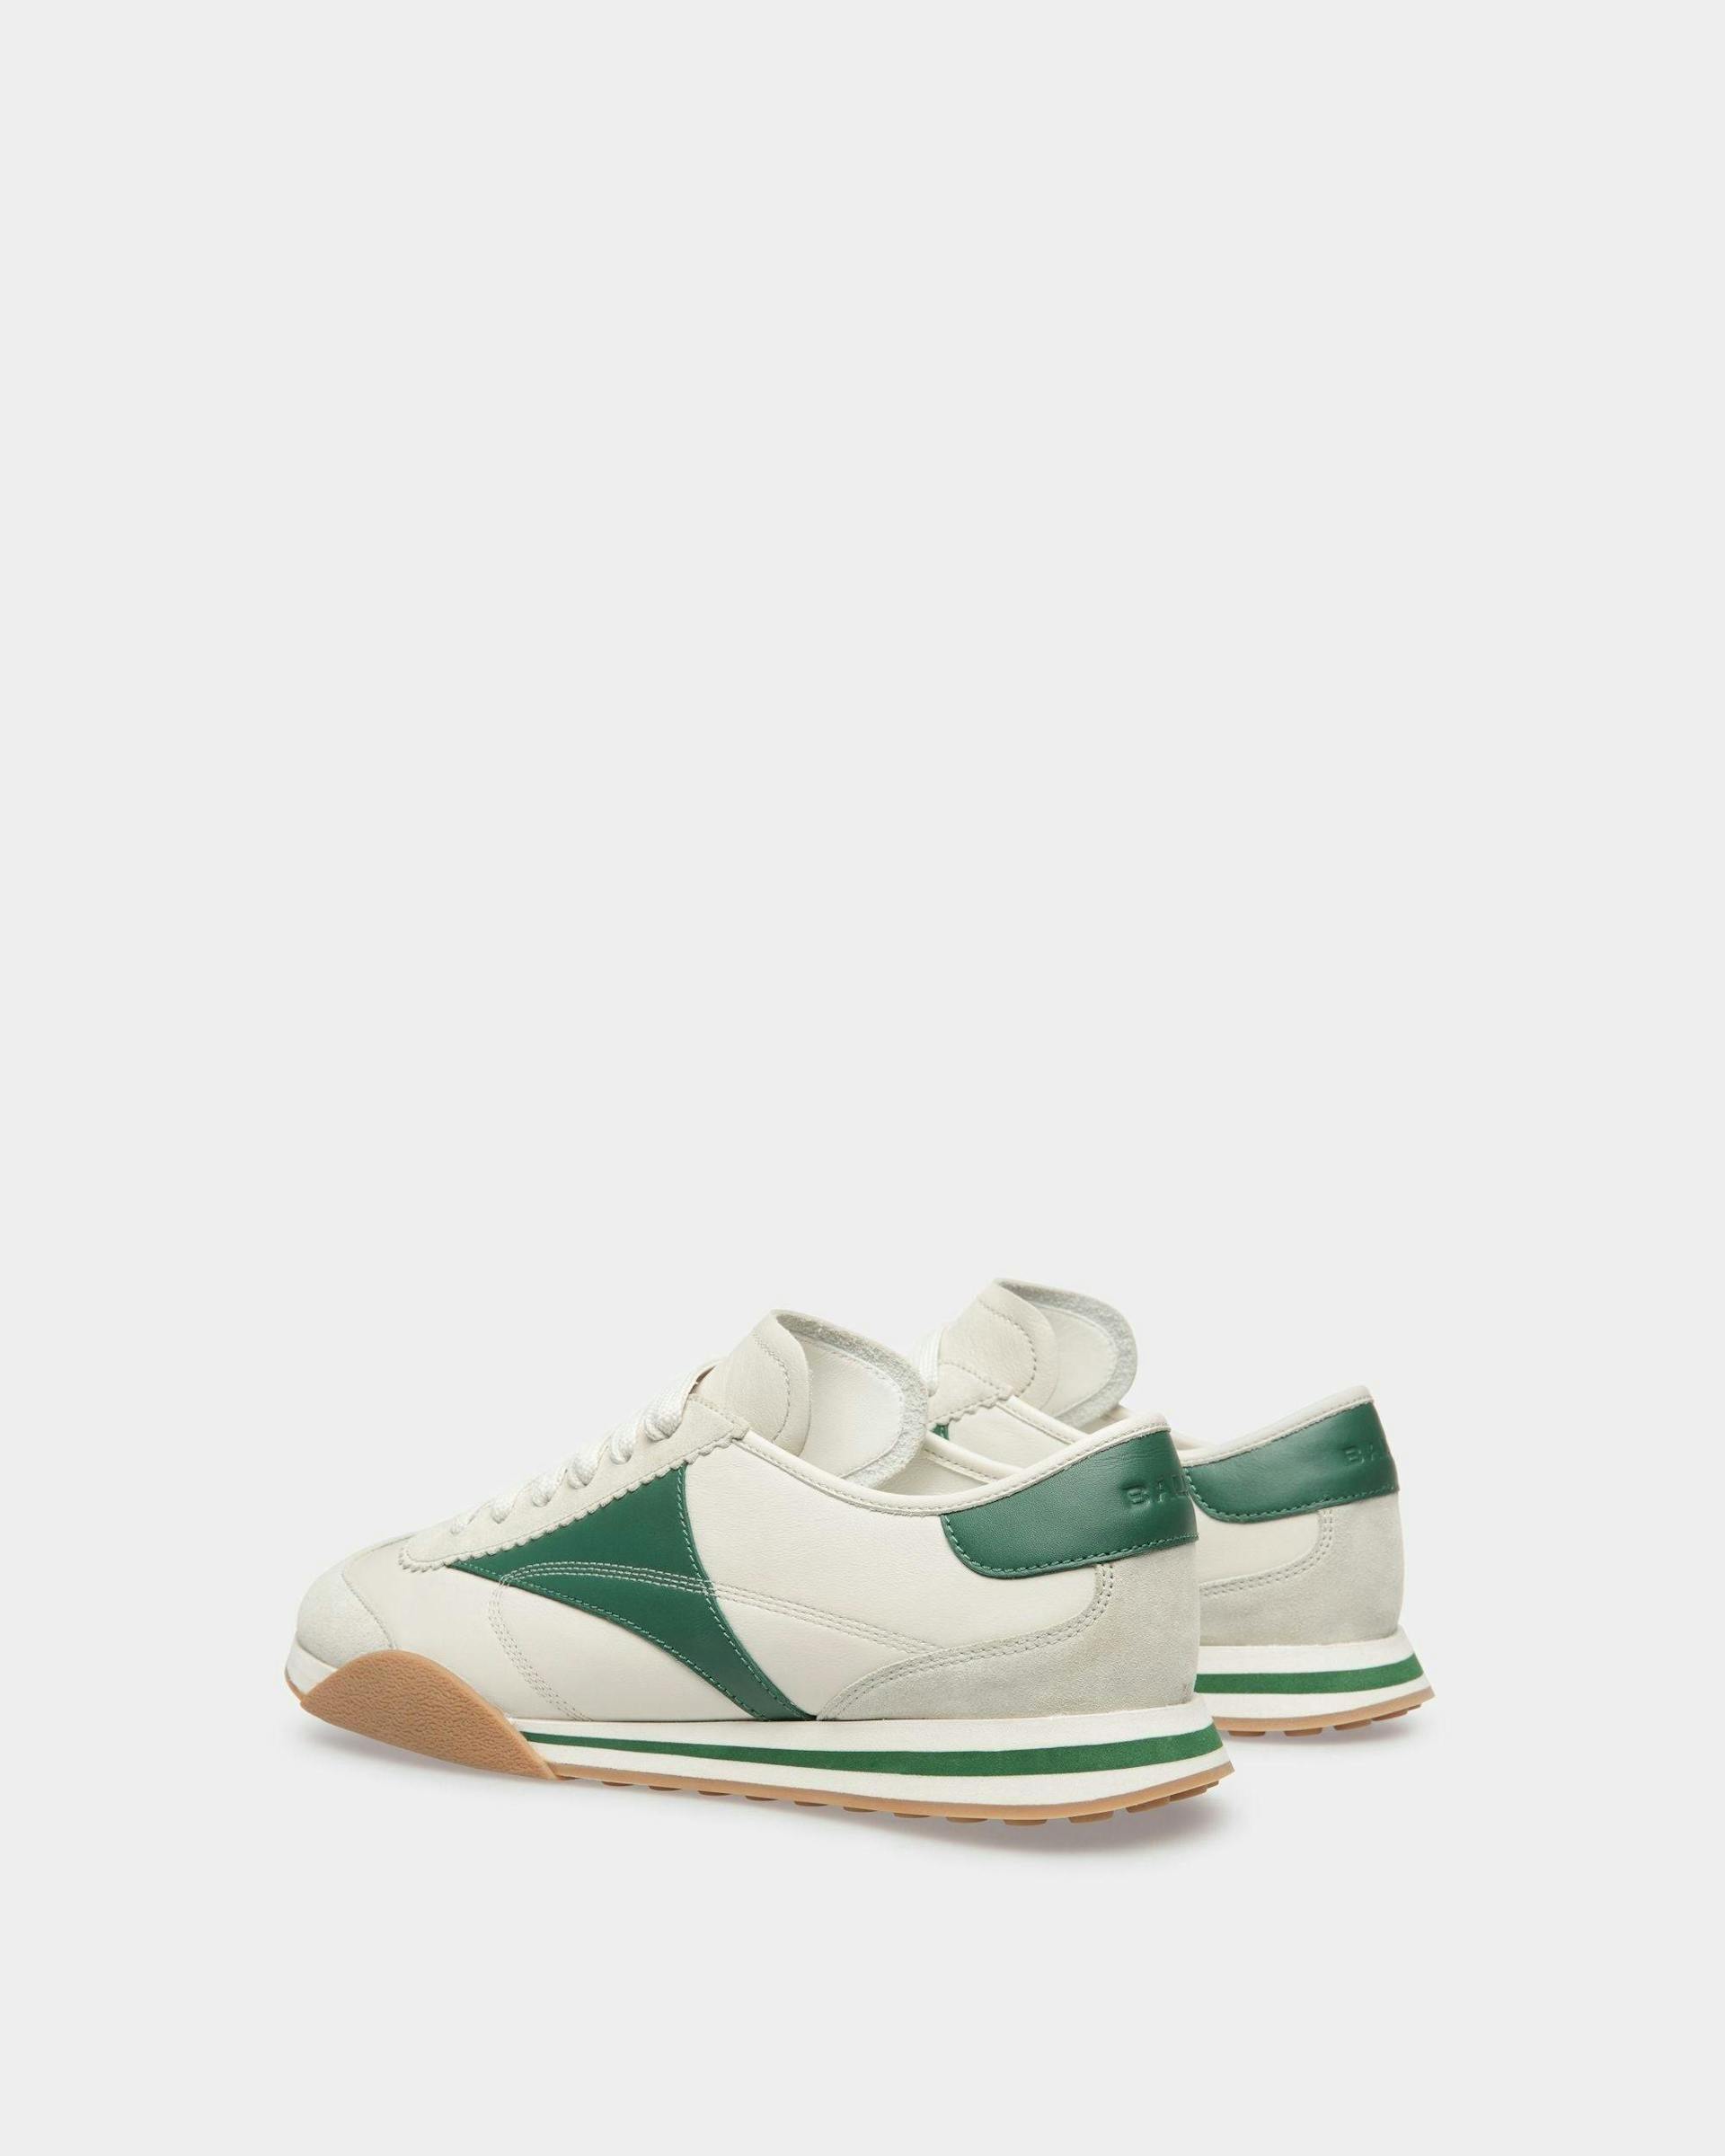 Men's Sussex Sneakers In Dusty White And Kelly Green Leather | Bally | Still Life 3/4 Back